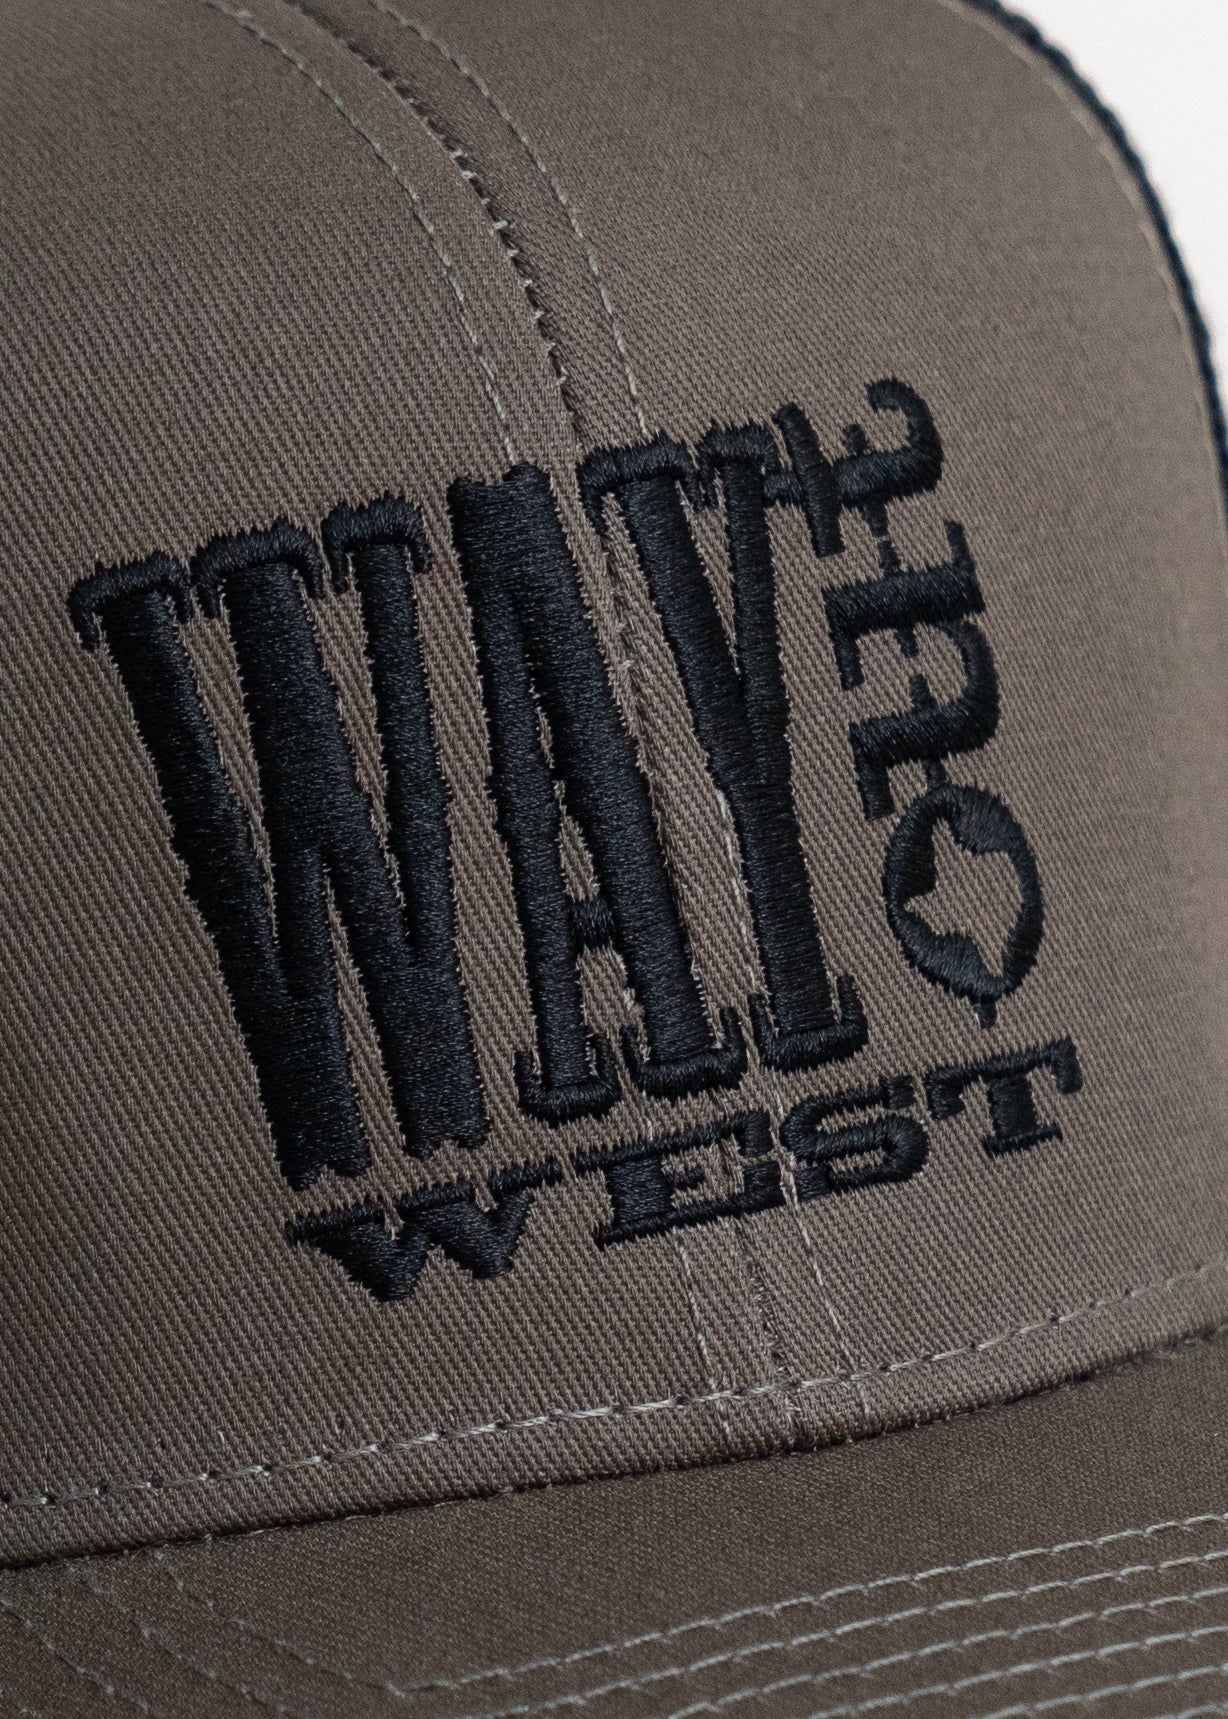 Embroidered WOW Black-Olive Mesh Trucker Hat